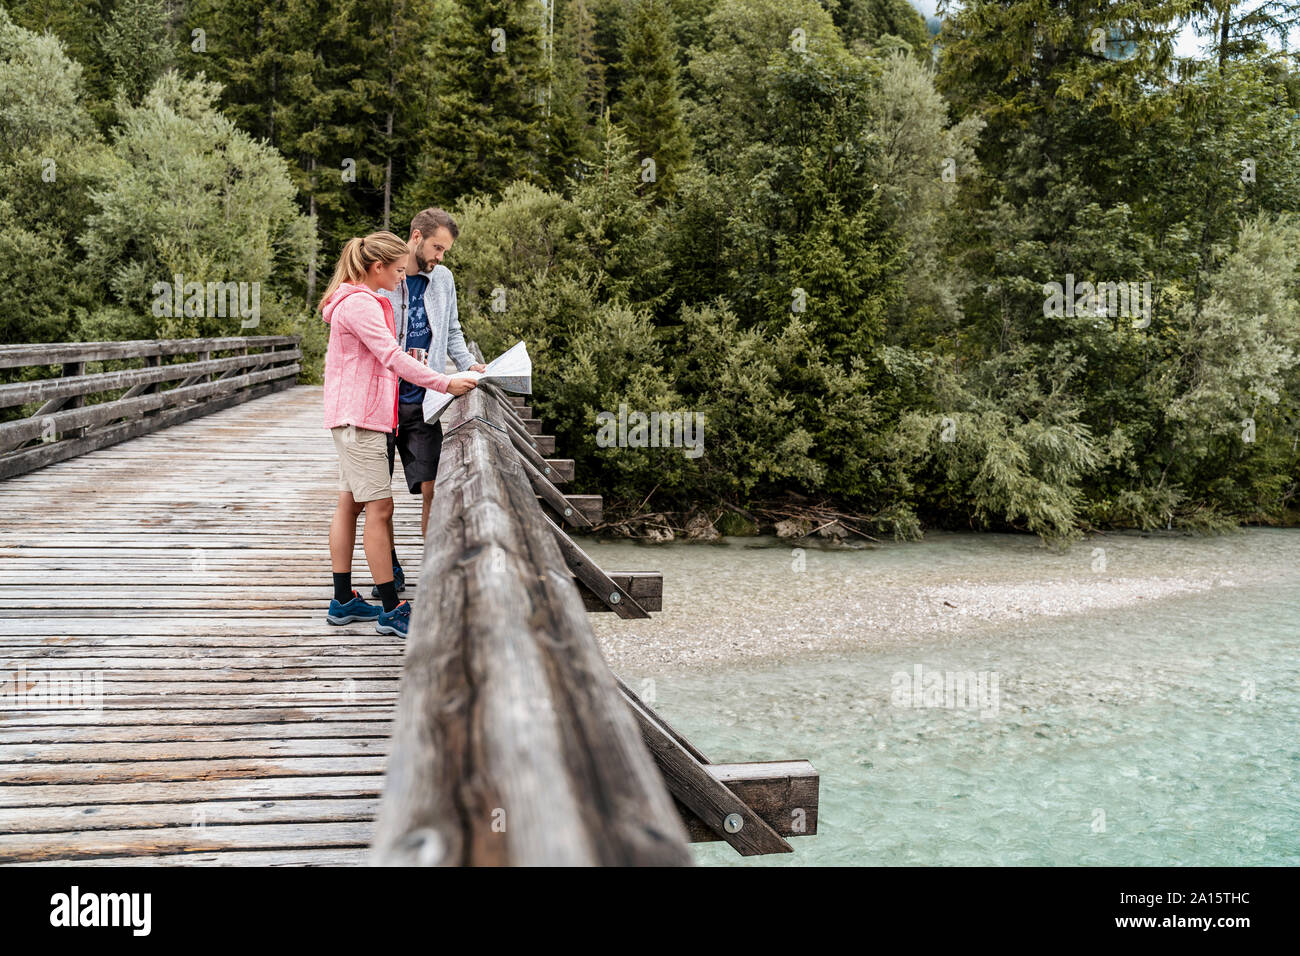 Young couple on a hiking trip reading map on wooden bridge, Vorderriss, Bavaria, Germany Stock Photo